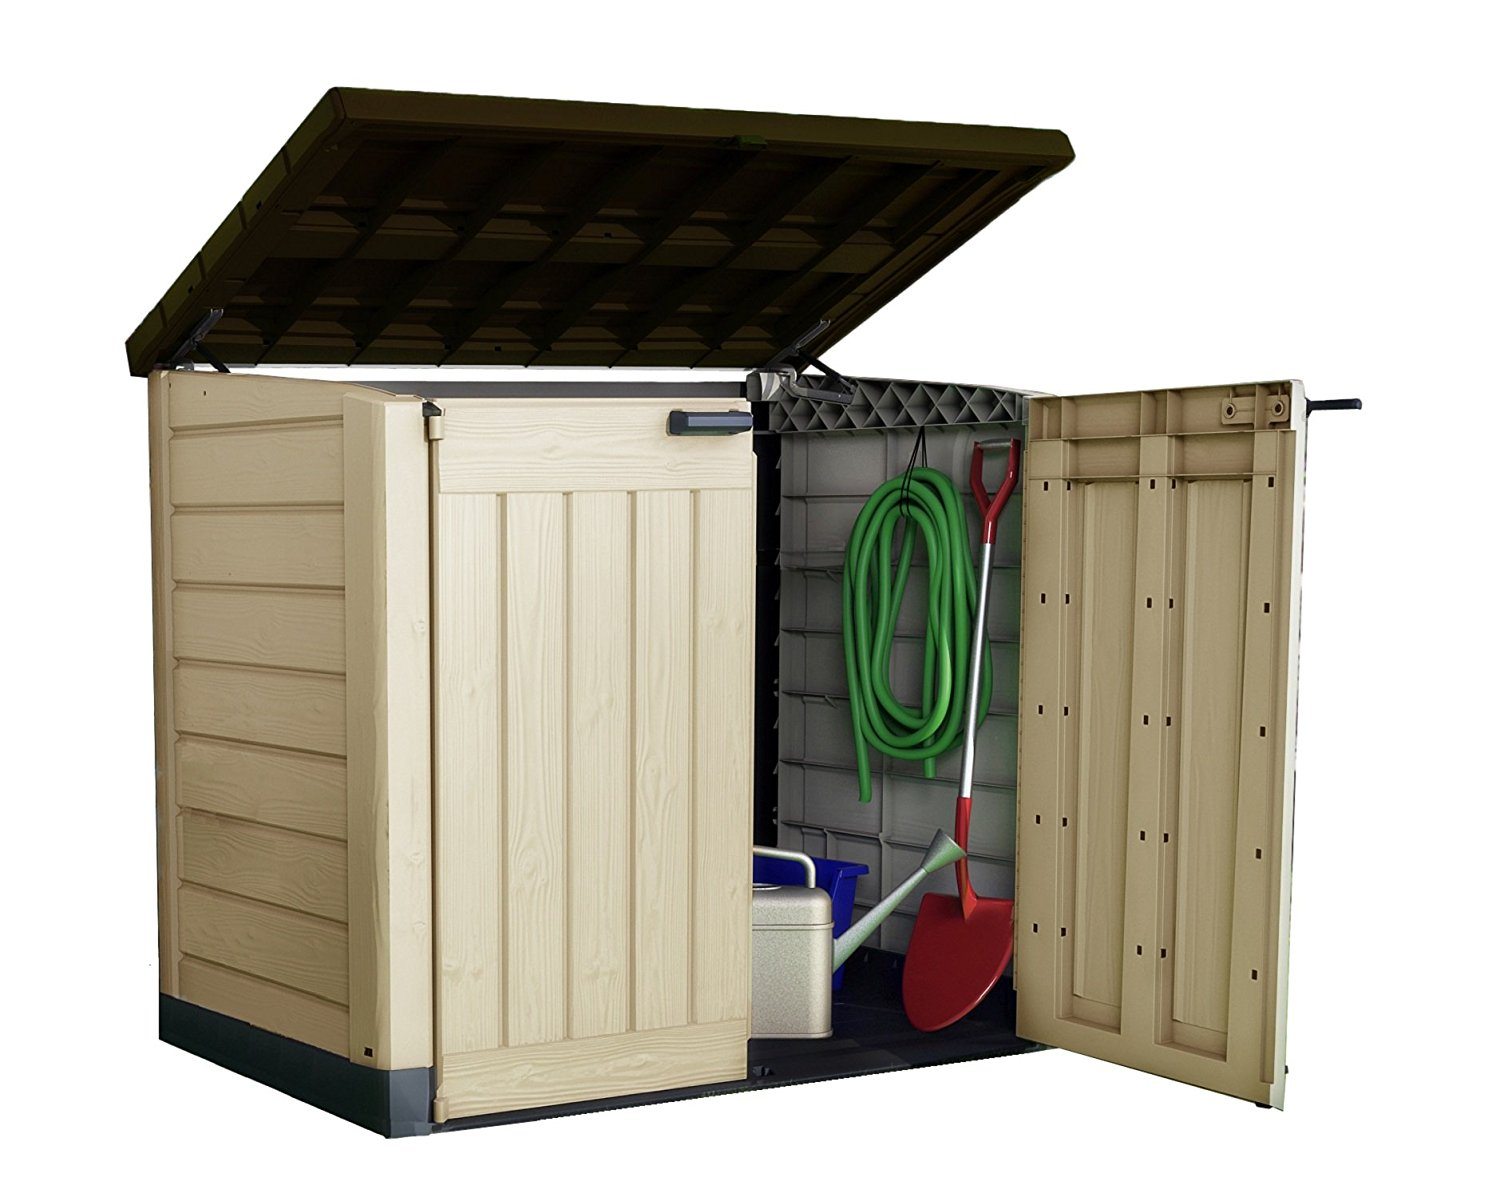 Keter Store It Out Max Outdoor Plastic Garden Storage Shed